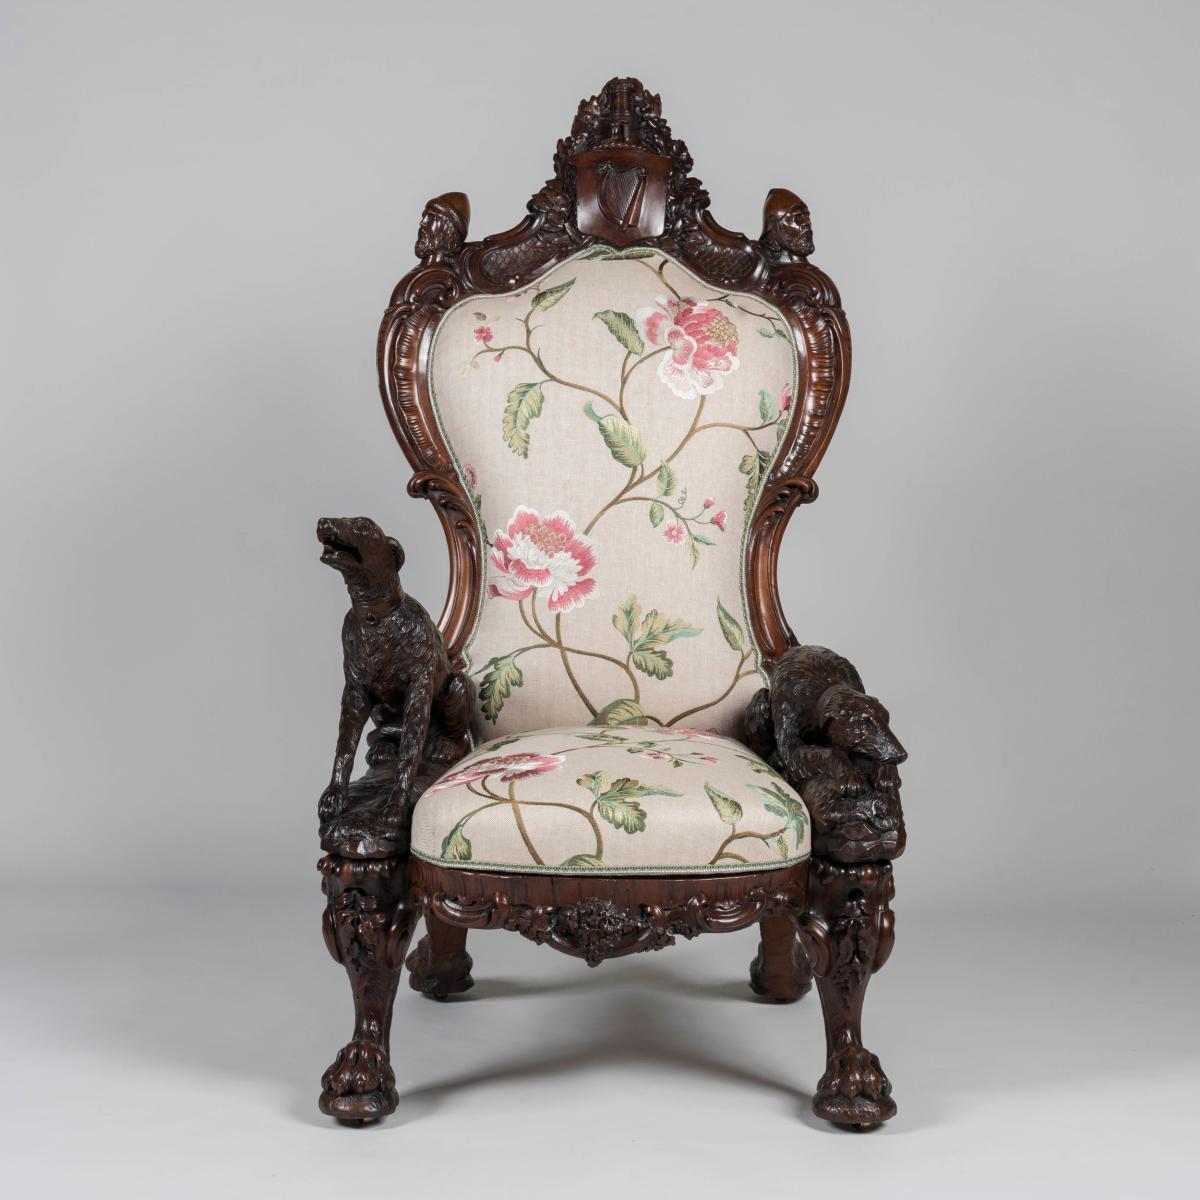 The 1851 Great Exhibition Carved Armchair by Arthur Jones